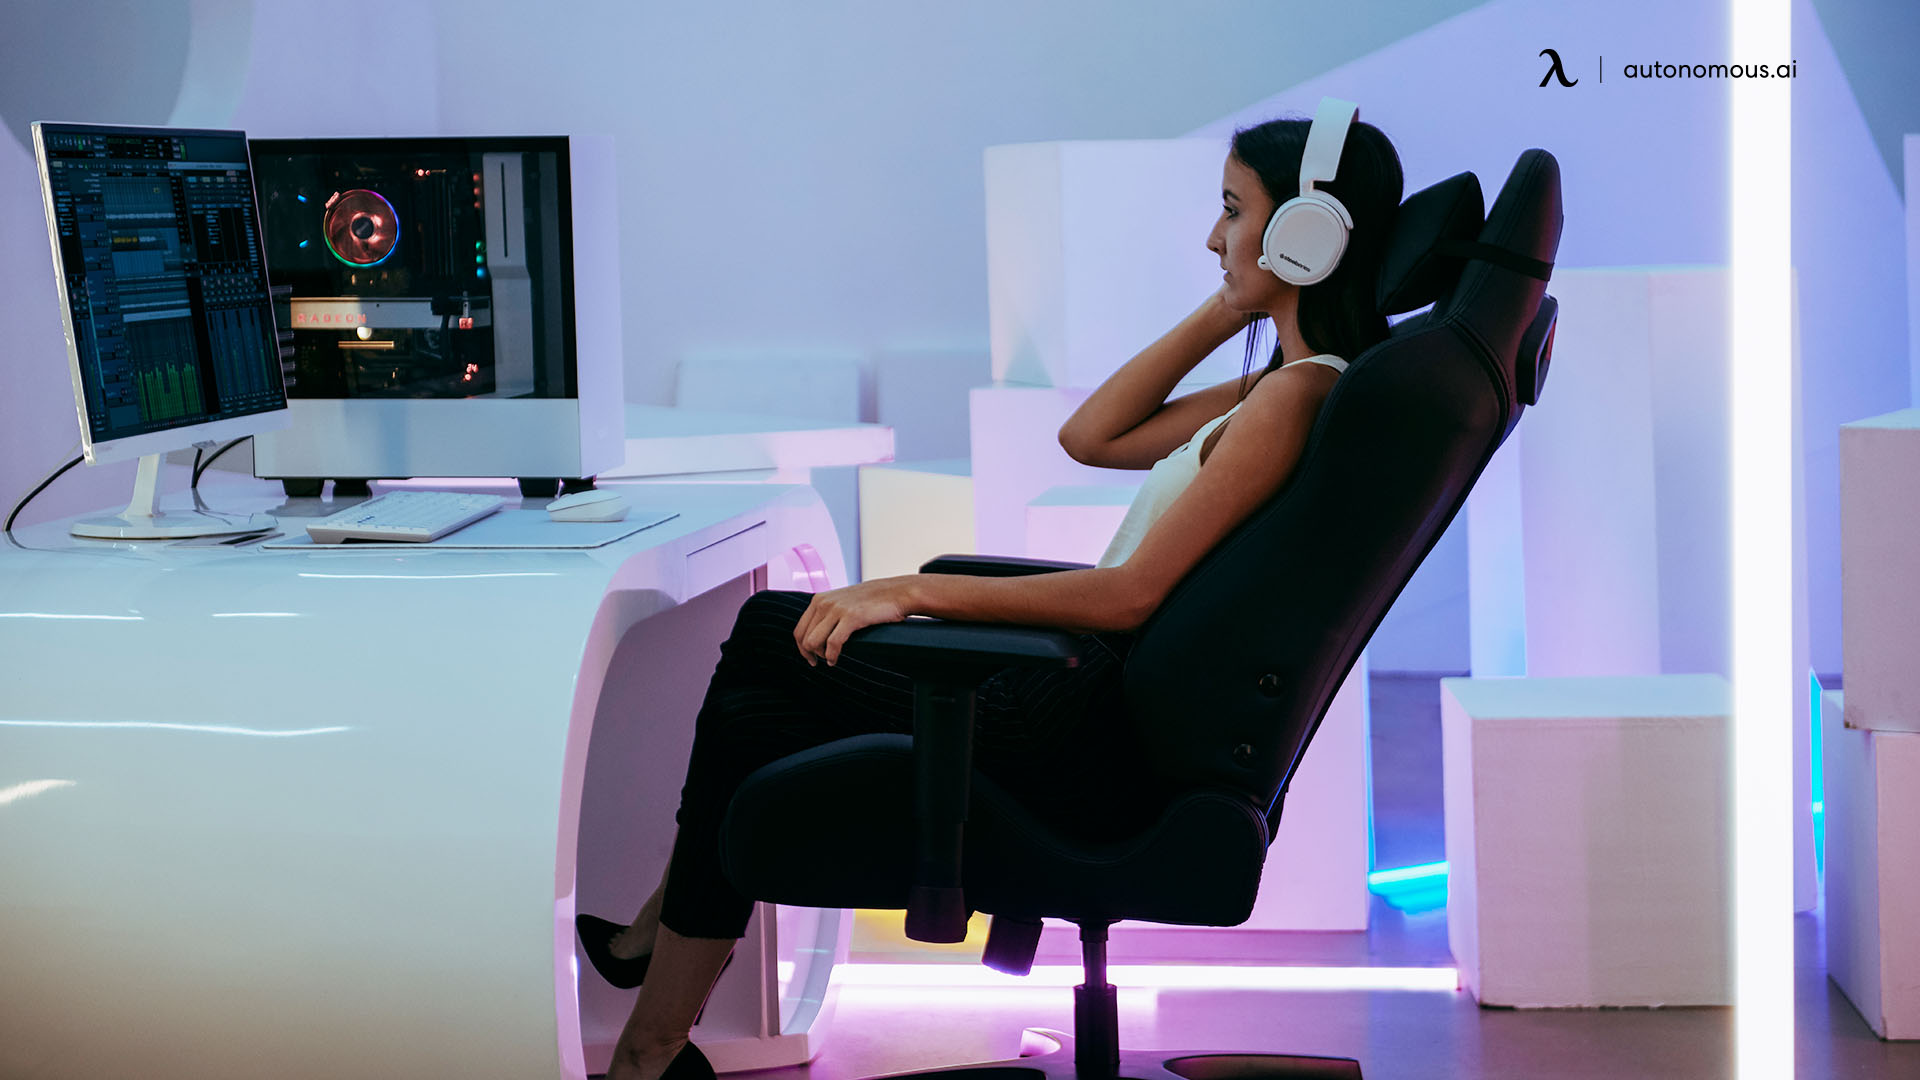 Standard Gaming Chair Dimension – Why Is It Important?